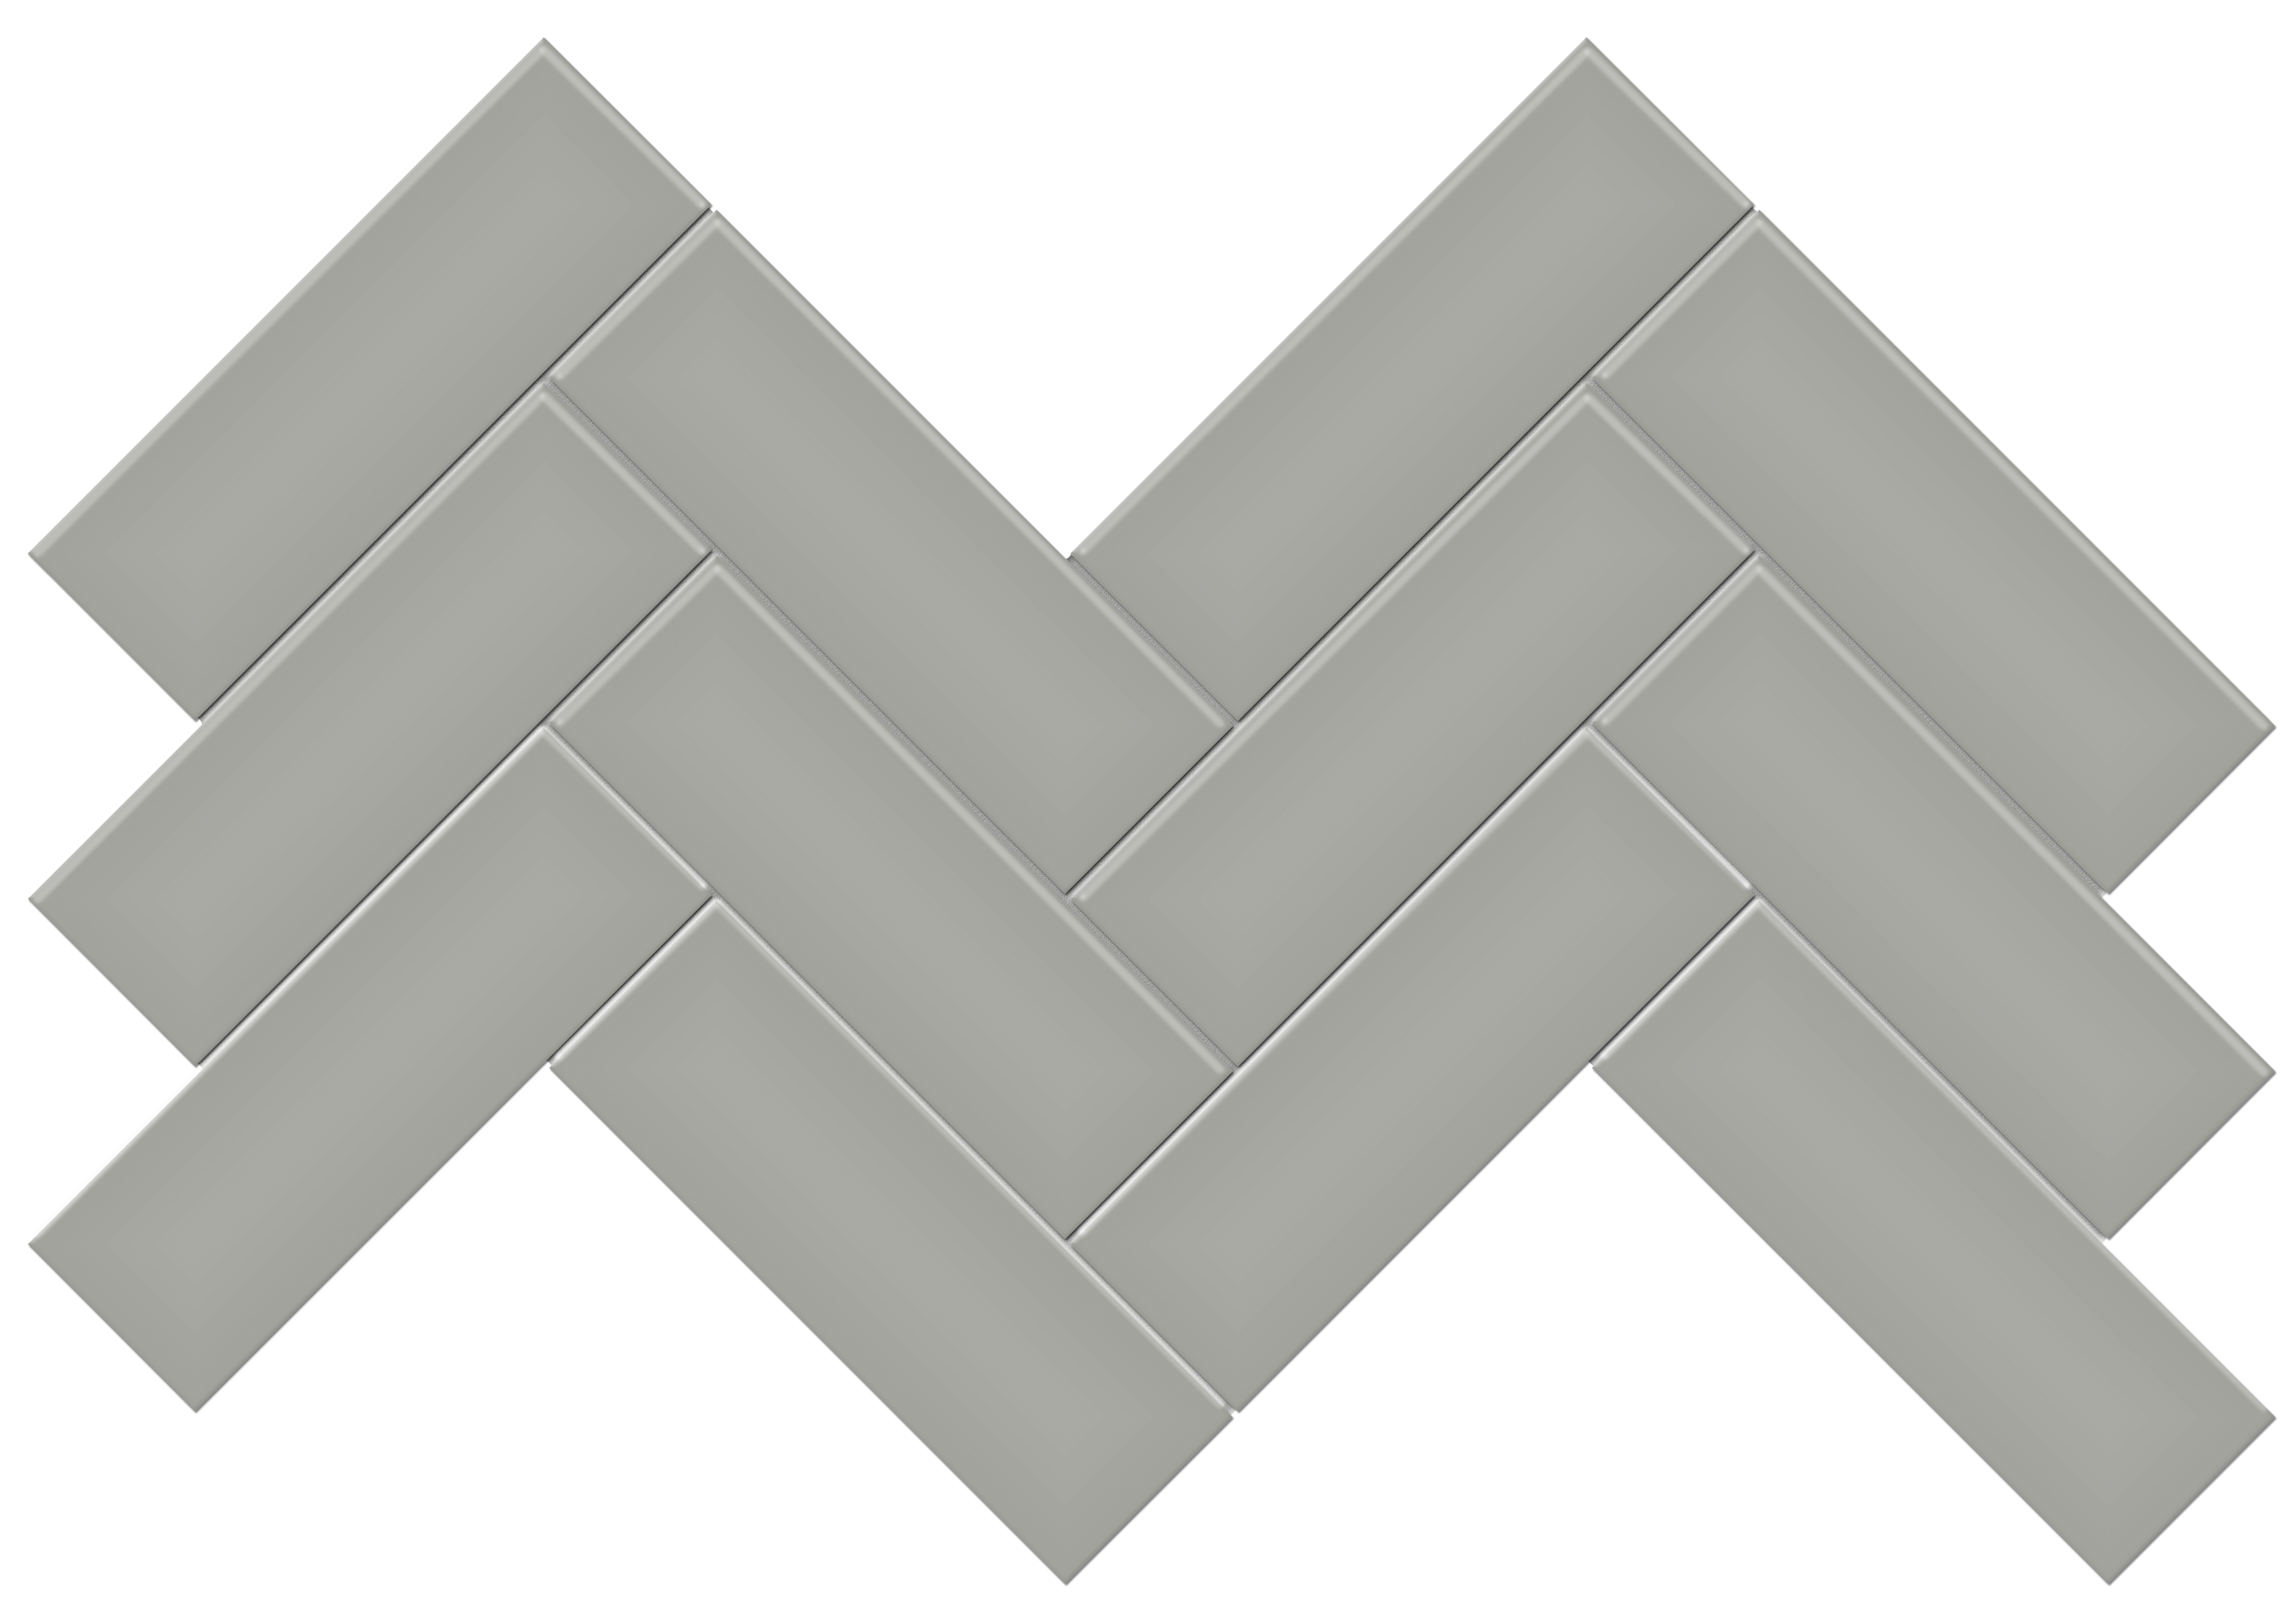 cement chic herringbone 2x6-inch pattern glazed porcelain mosaic from soho anatolia collection distributed by surface group international matte finish pressed edge mesh shape